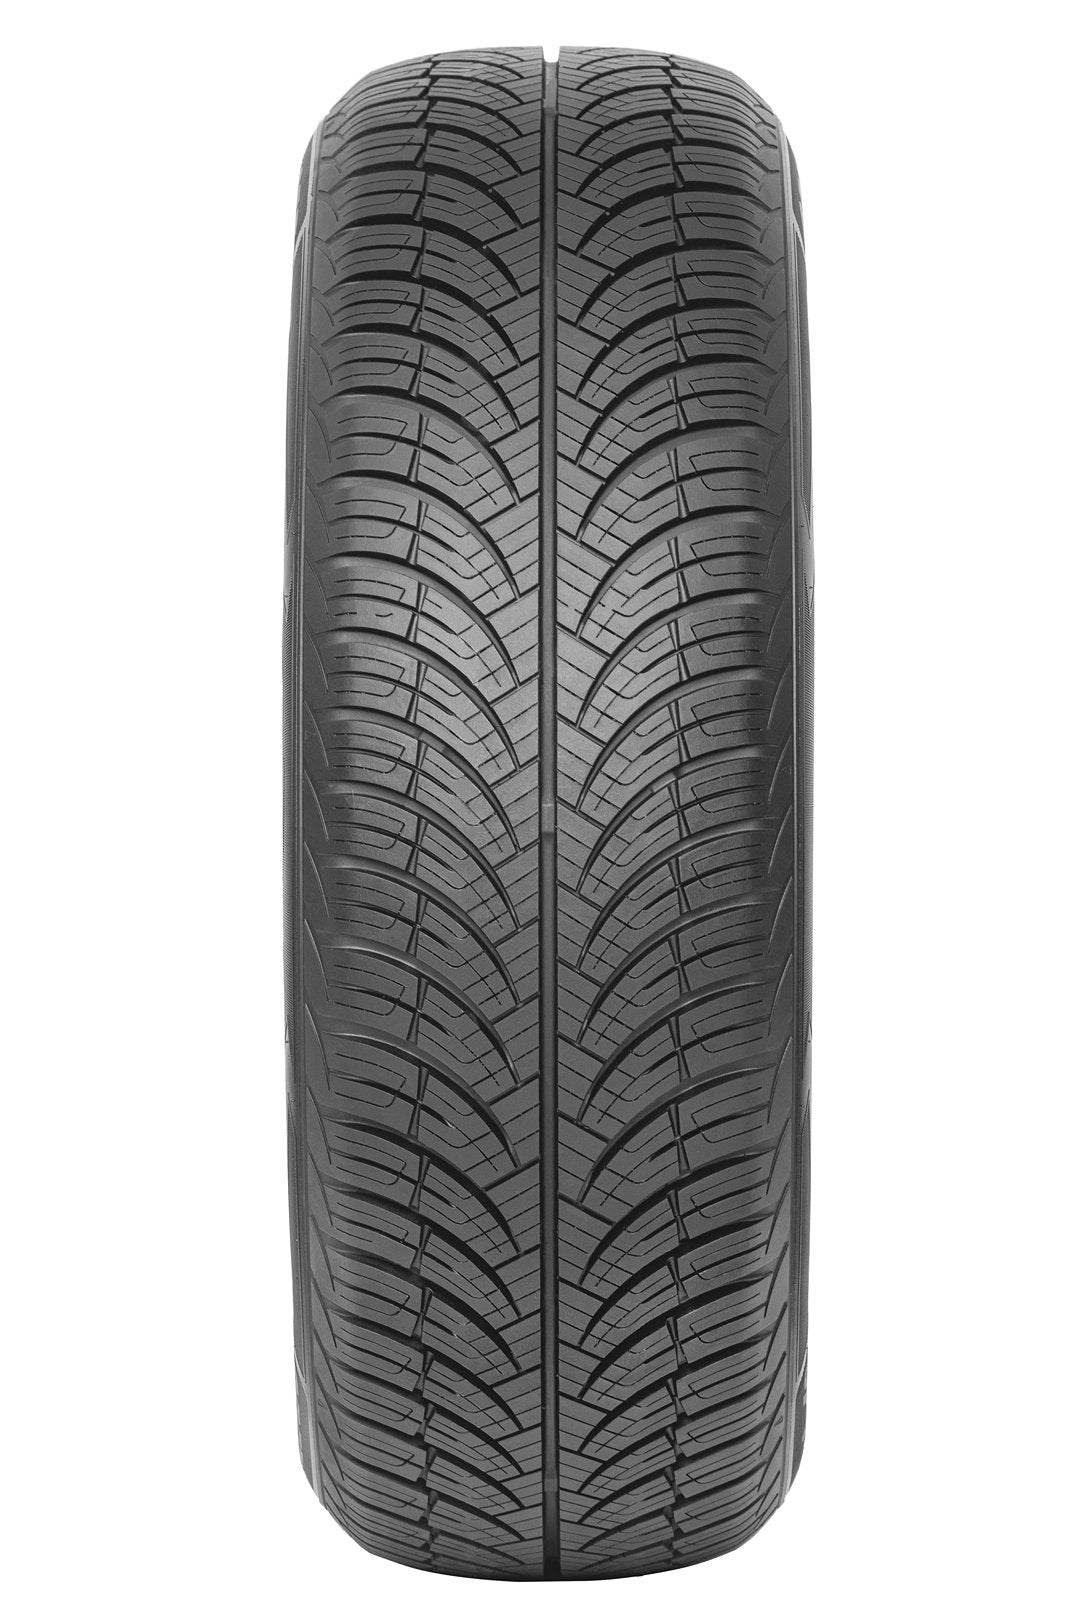 215/60R17 GRENLANDER GREENWING A/S ALL WEATHER - Toee Tire